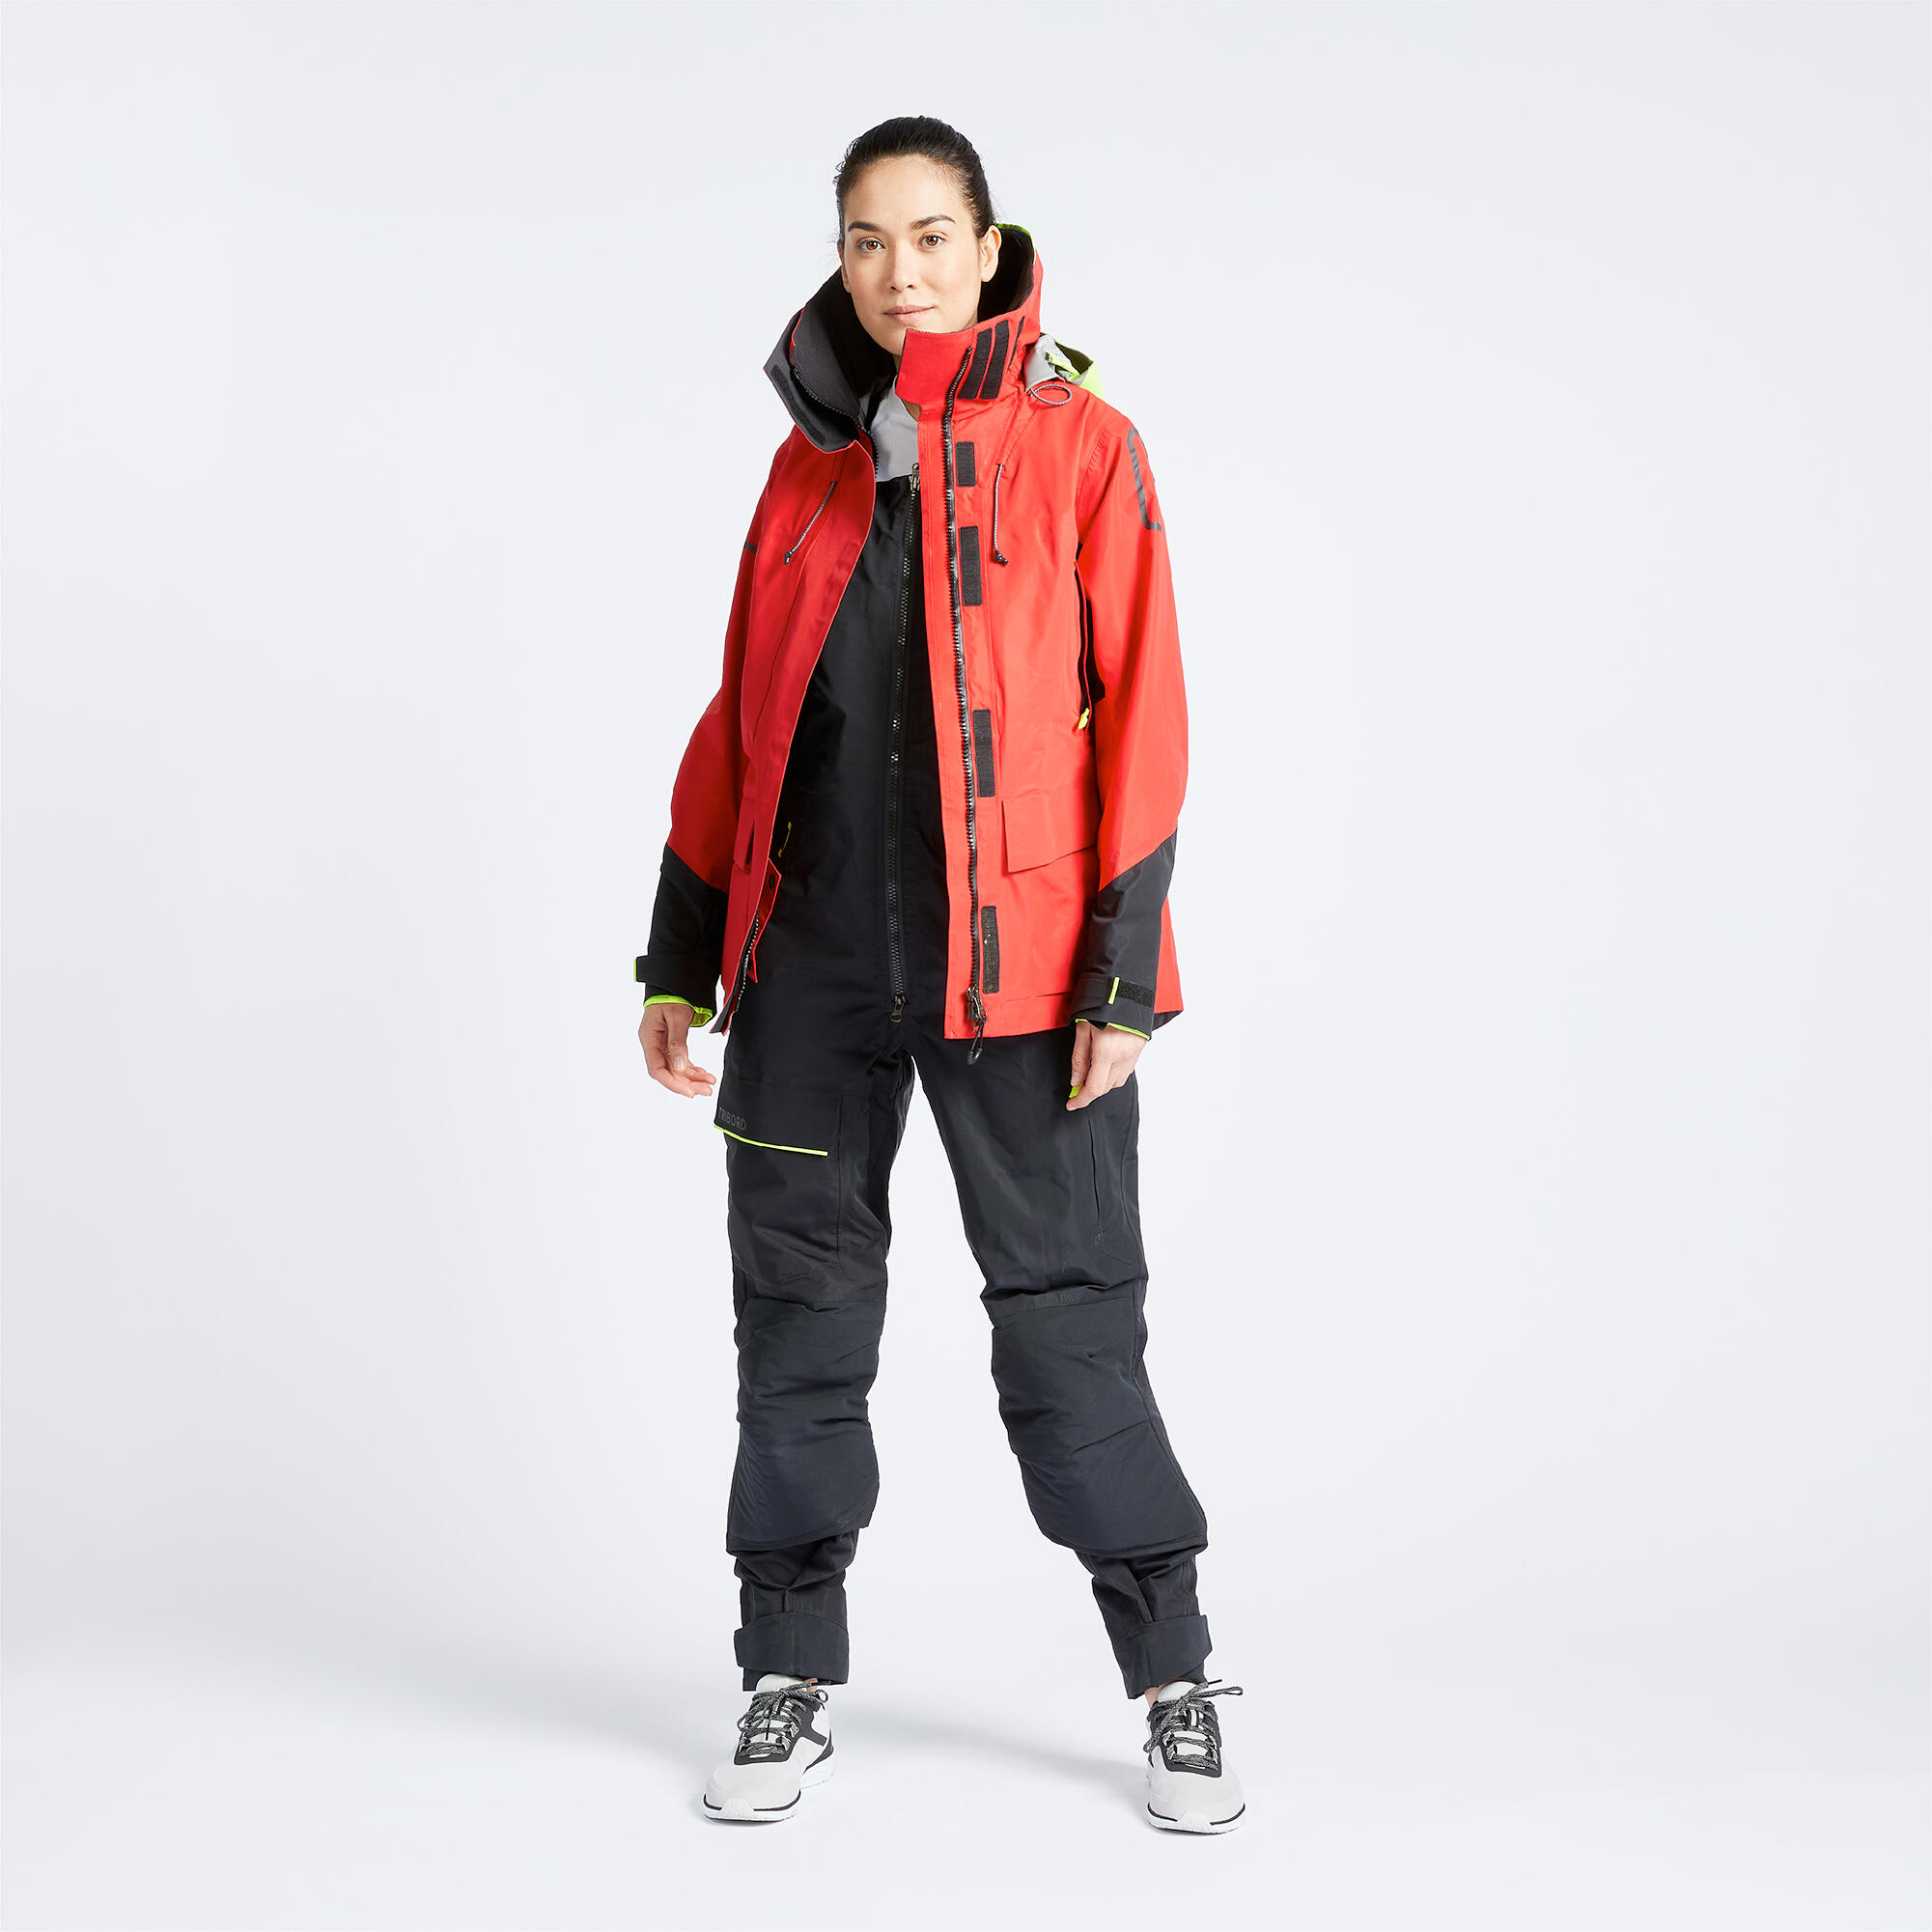 Women’s Sailing Jacket Offshore 900 - Red 11/12